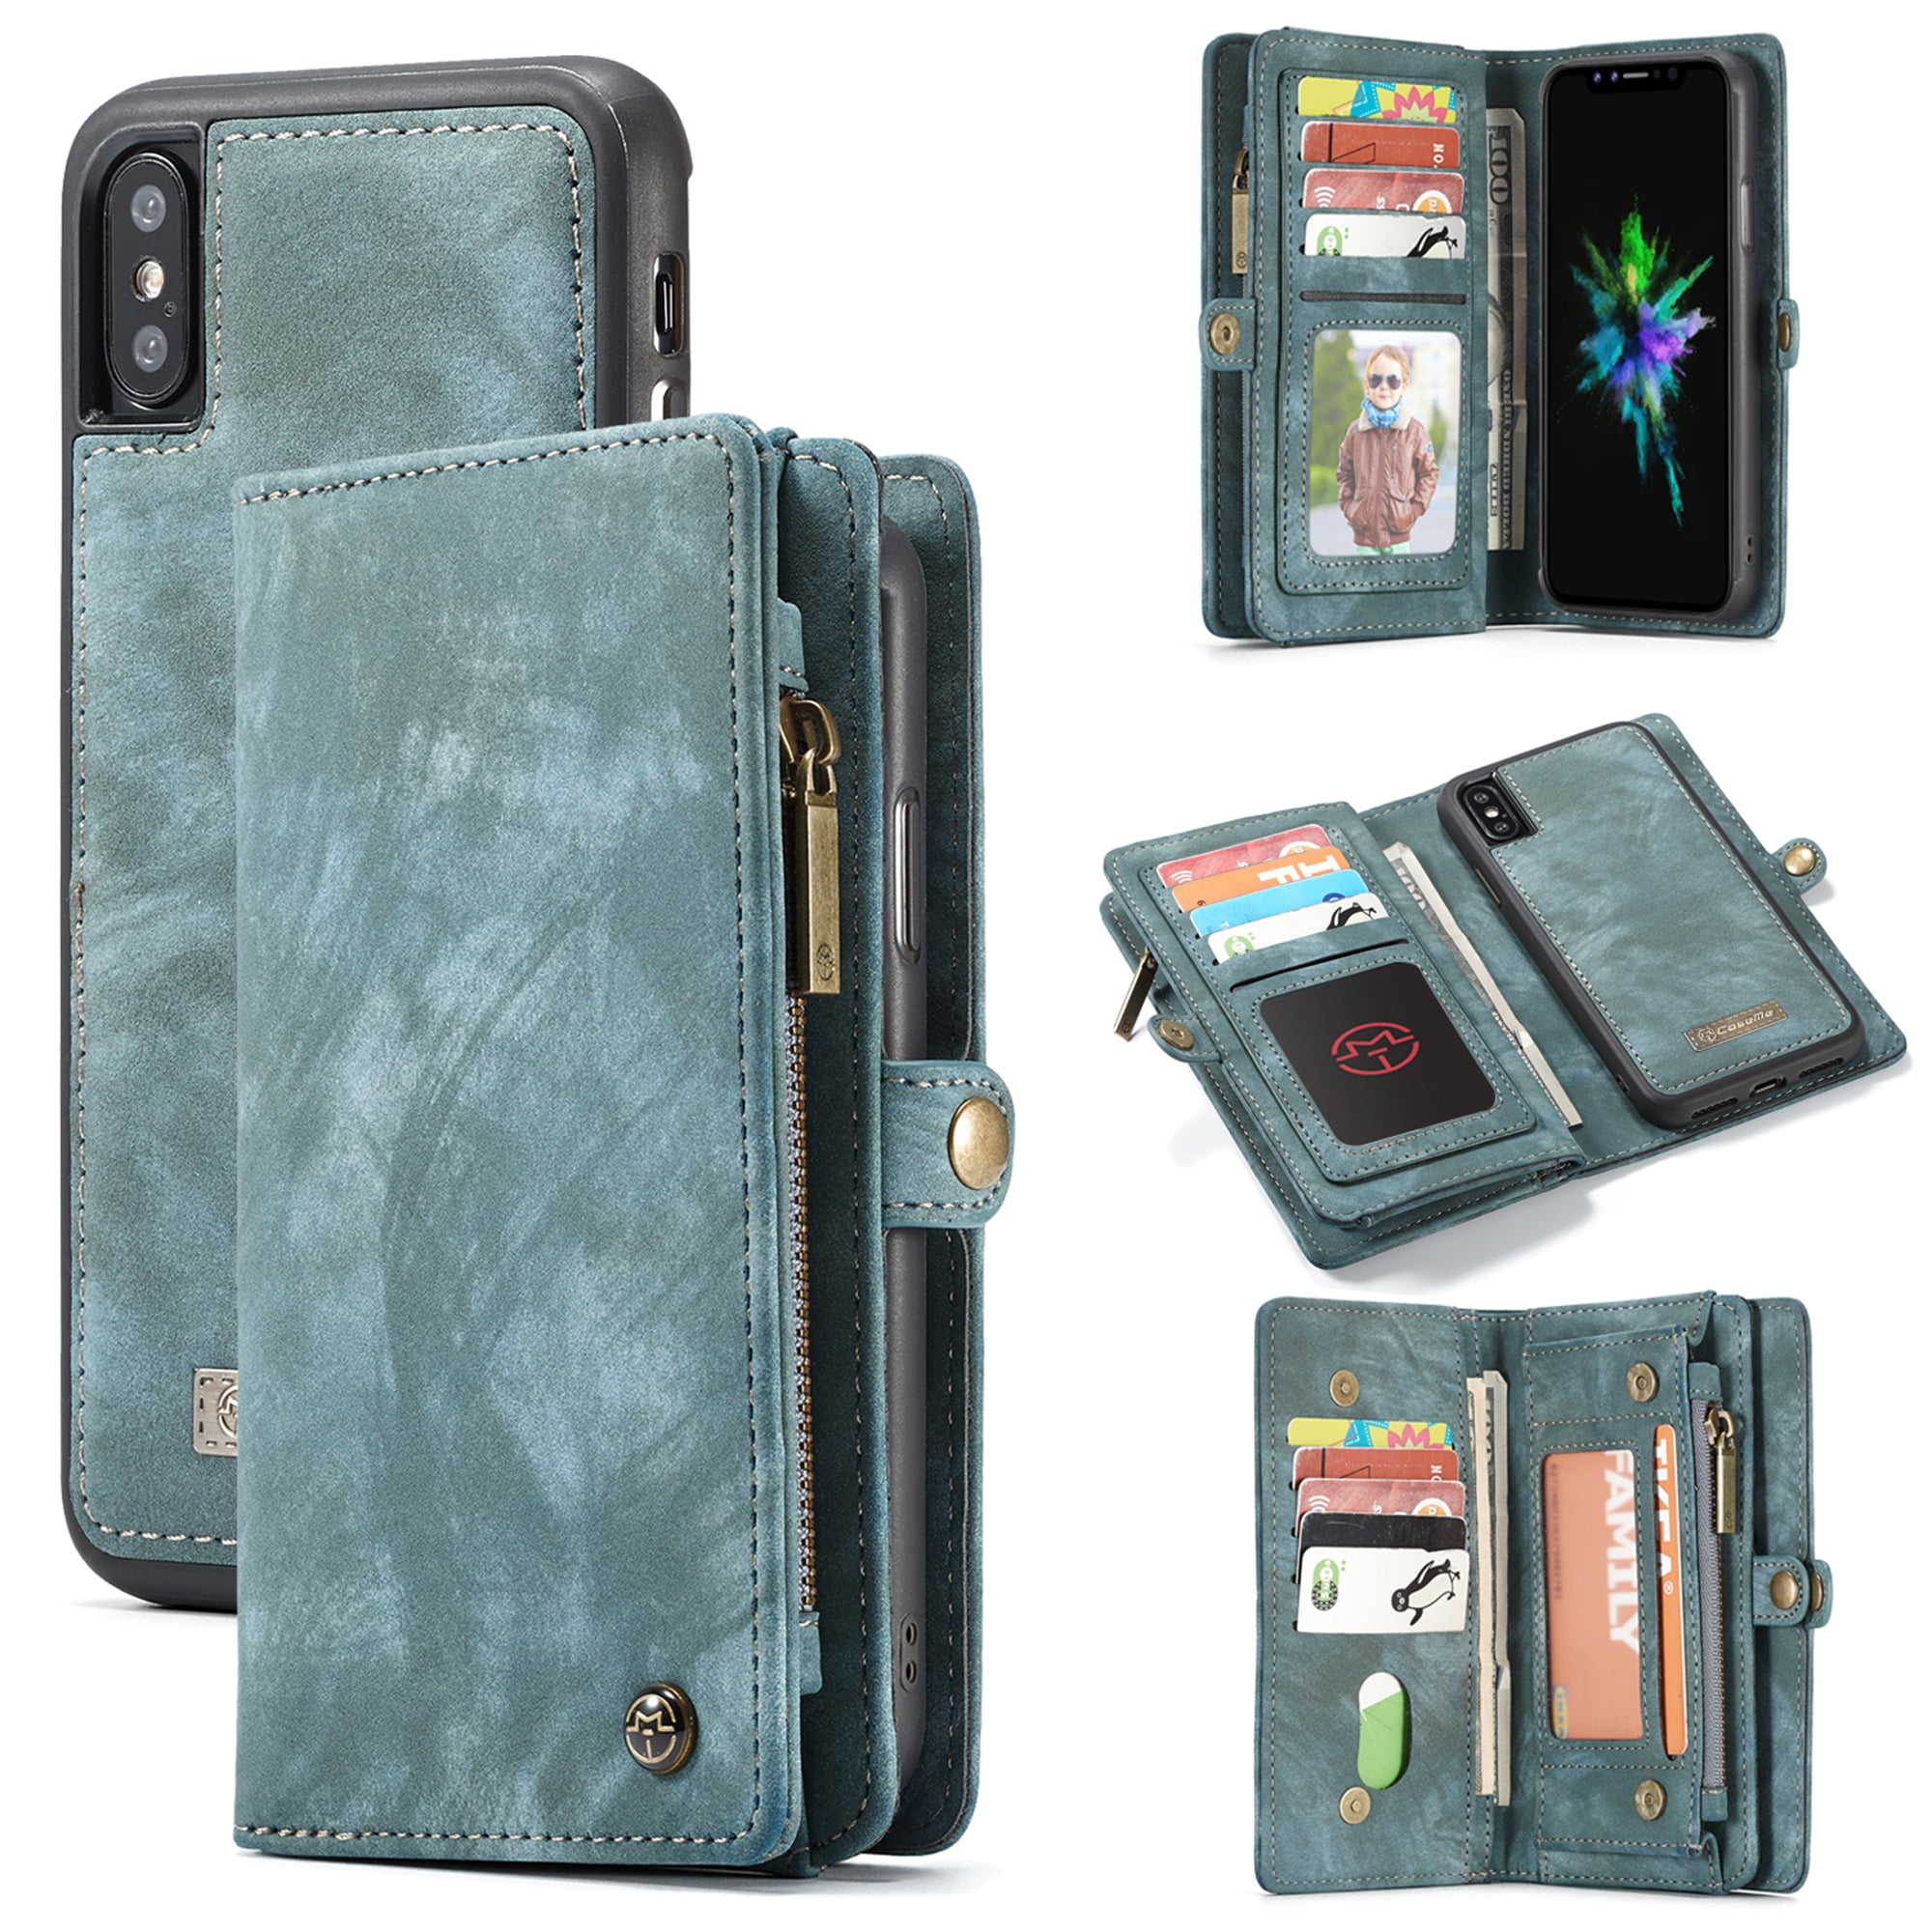 For iPhone Xs / iPhone X Wallet Detachable Case, Multi-functional 2 in